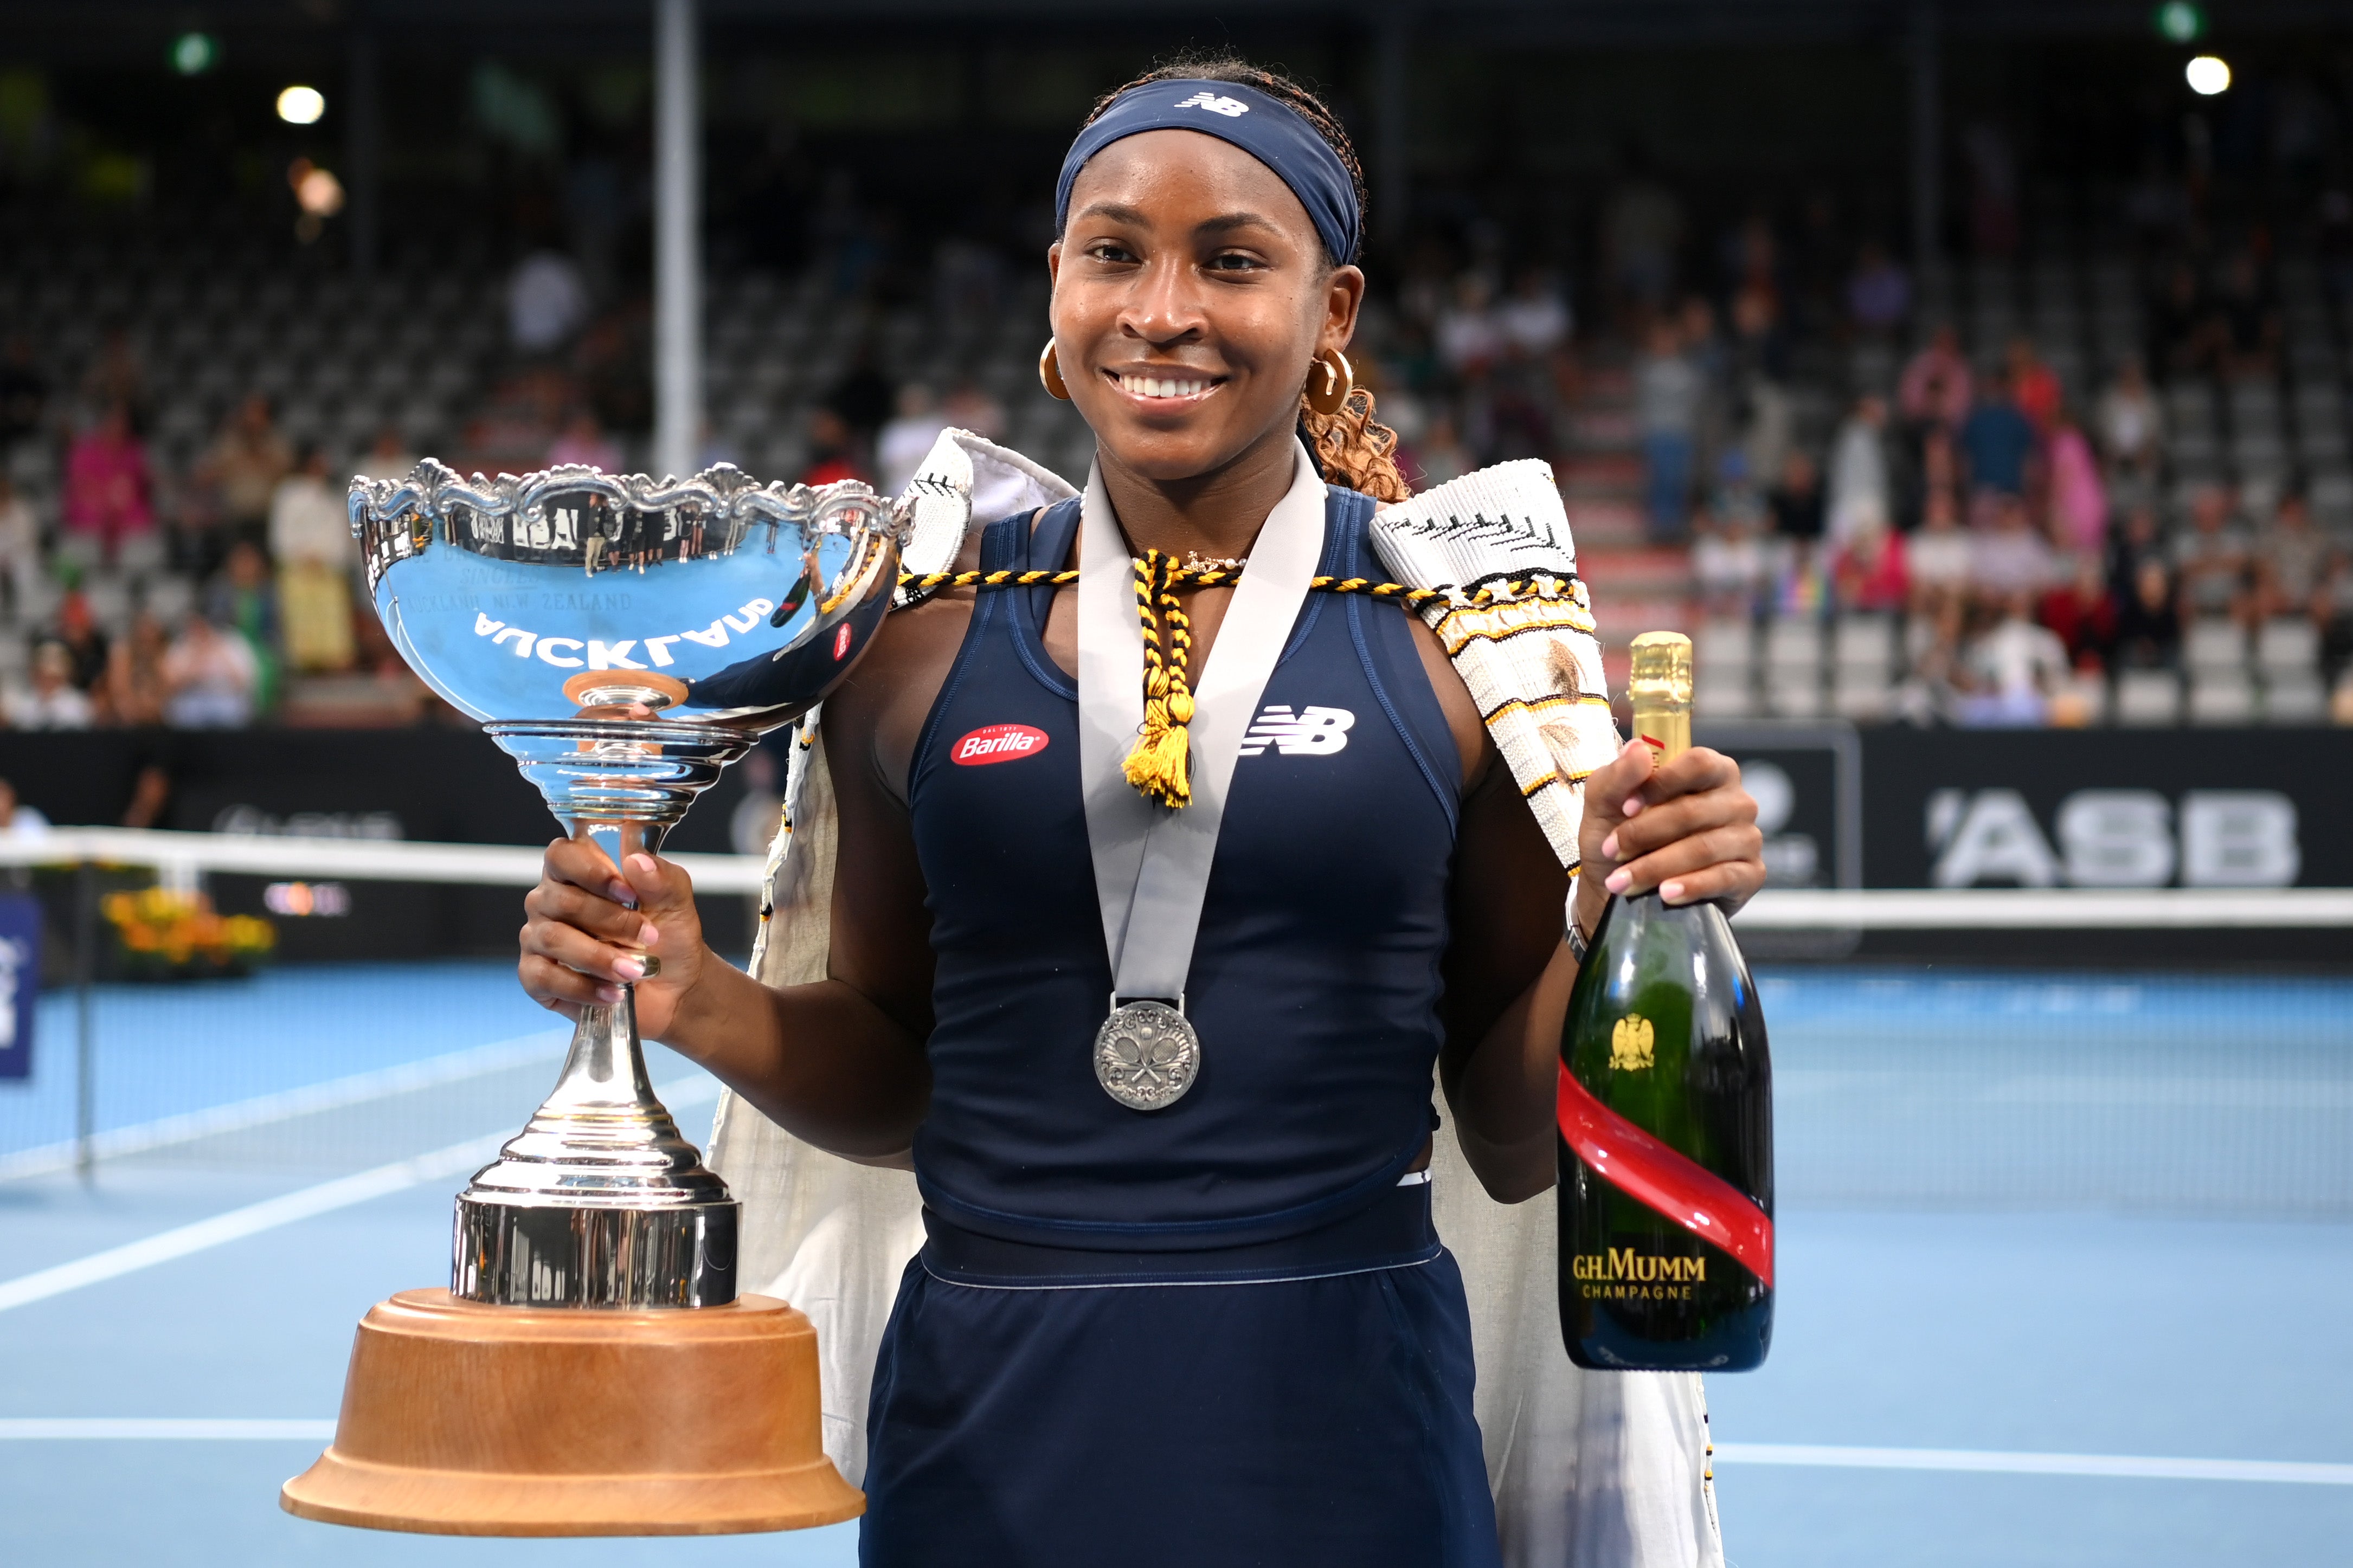 Coco Gauff is eyeing a second consecutive grand slam title